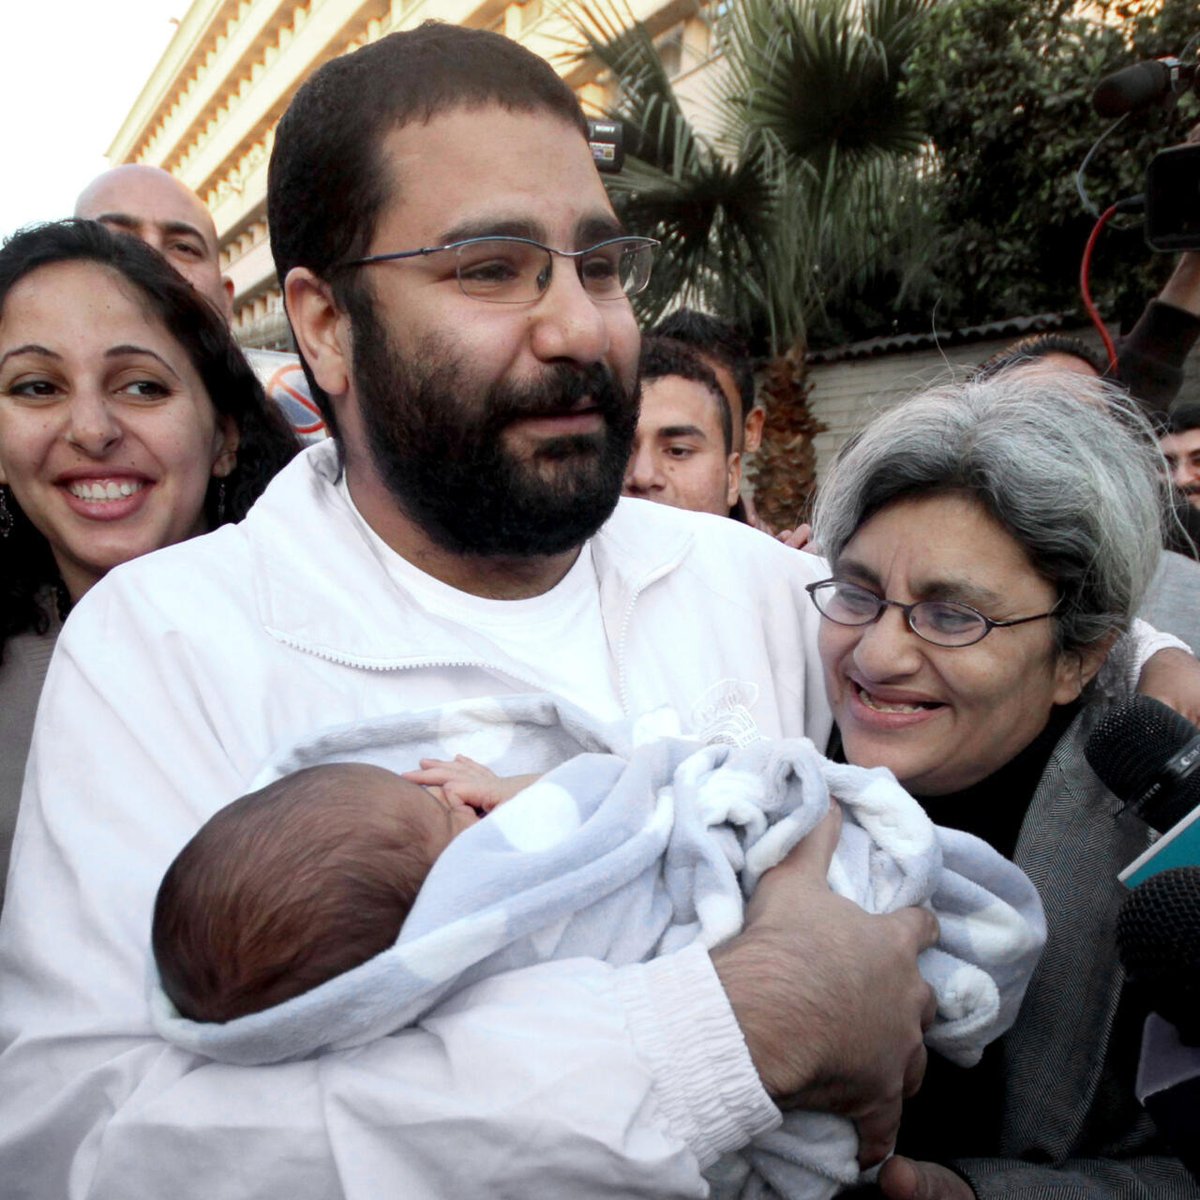 Today, Khaled, the son of Egyptian blogger Alaa Abdel Fattah, turns 11 years old. 

@Alaa should be free and celebrating with his son. Instead, he's been behind bars for and missed all of Khaled's birthdays since he was born except for one.

#FreeAlaa #SaveAlaa